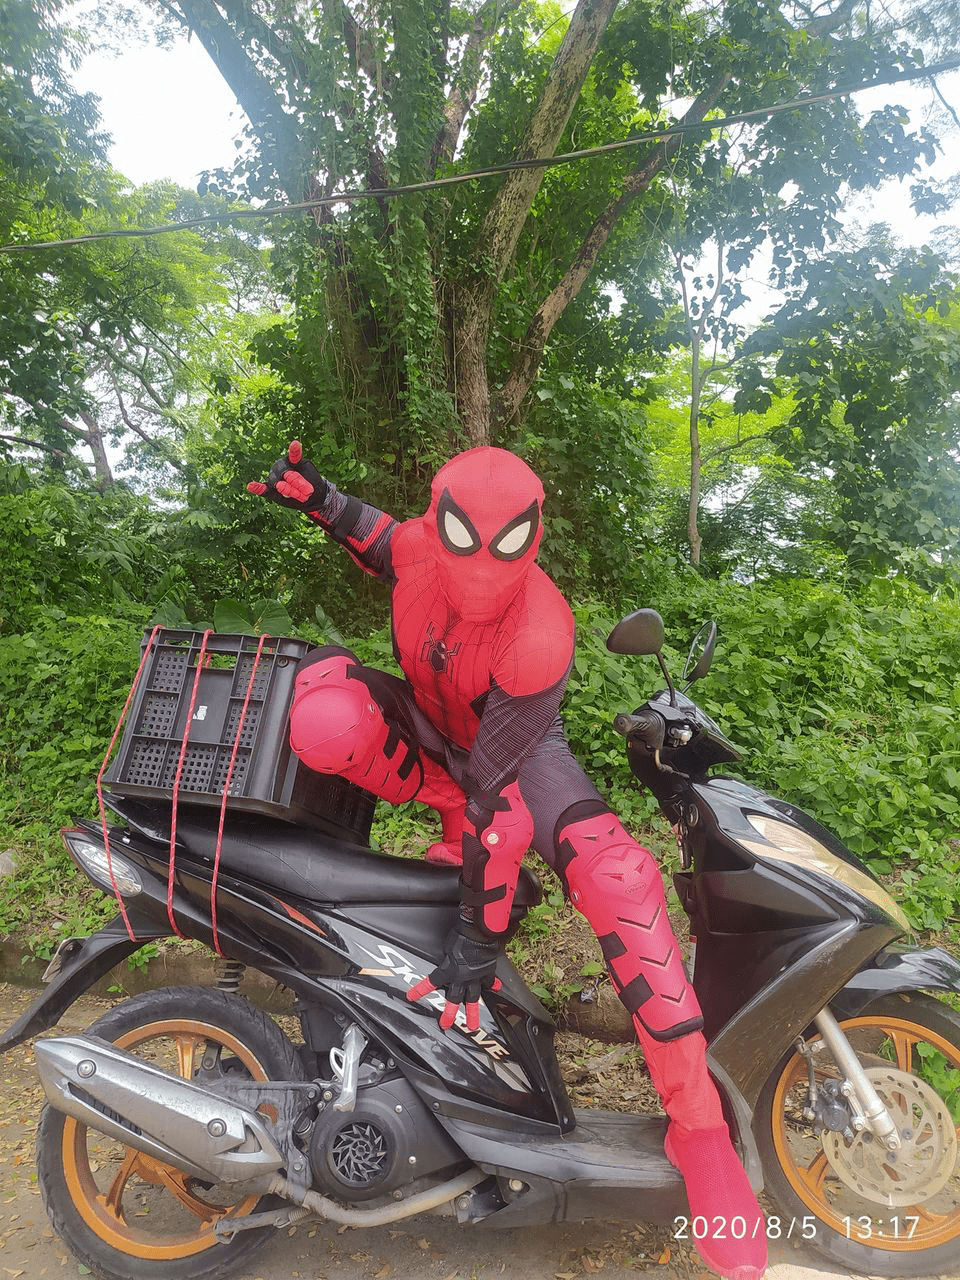 spiderman on delivery bike